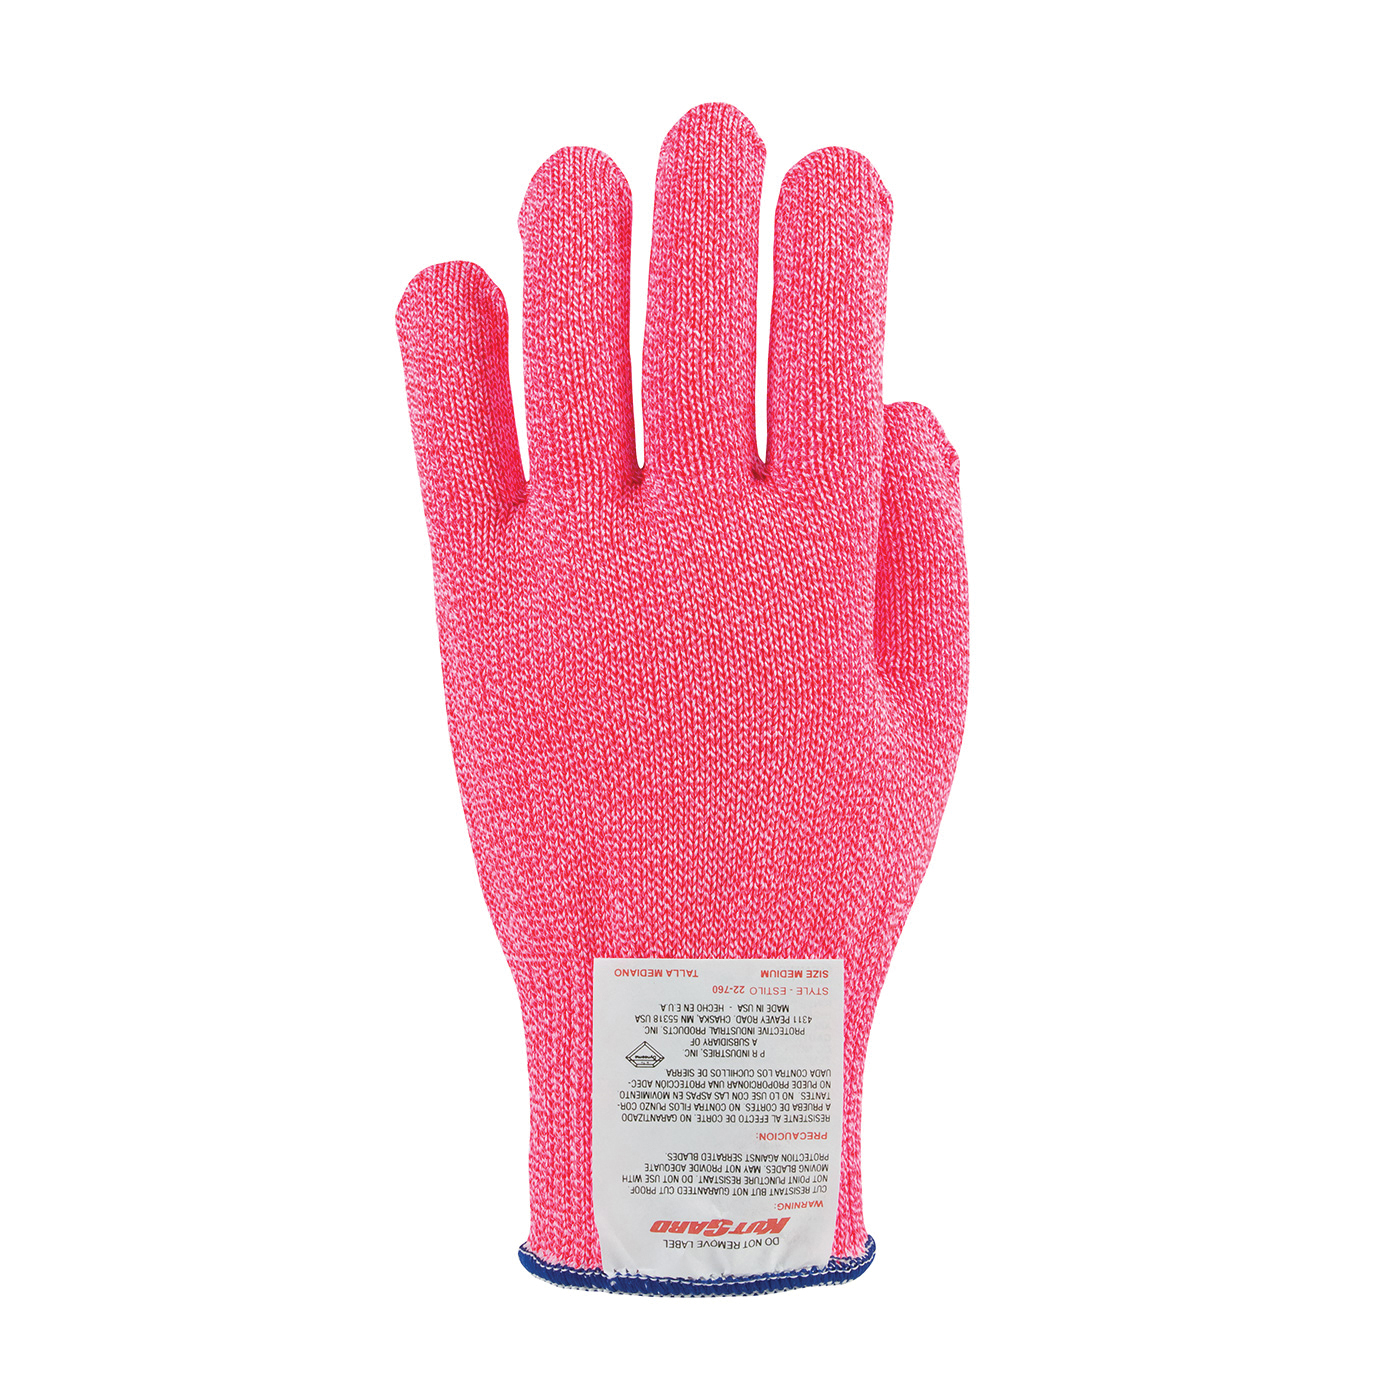 PIP® Kut-Gard® 22-760NP/L Anti-Microbial Medium Weight Unisex Cut Resistant Gloves, L, Uncoated Coating, Dyneema®/Polyester/Silica/Stainless Steel/Synthetic Fiber, Elastic/Knit Wrist Cuff, Resists: Cut, Shrink and Slash, ANSI Cut-Resistance Level: A7